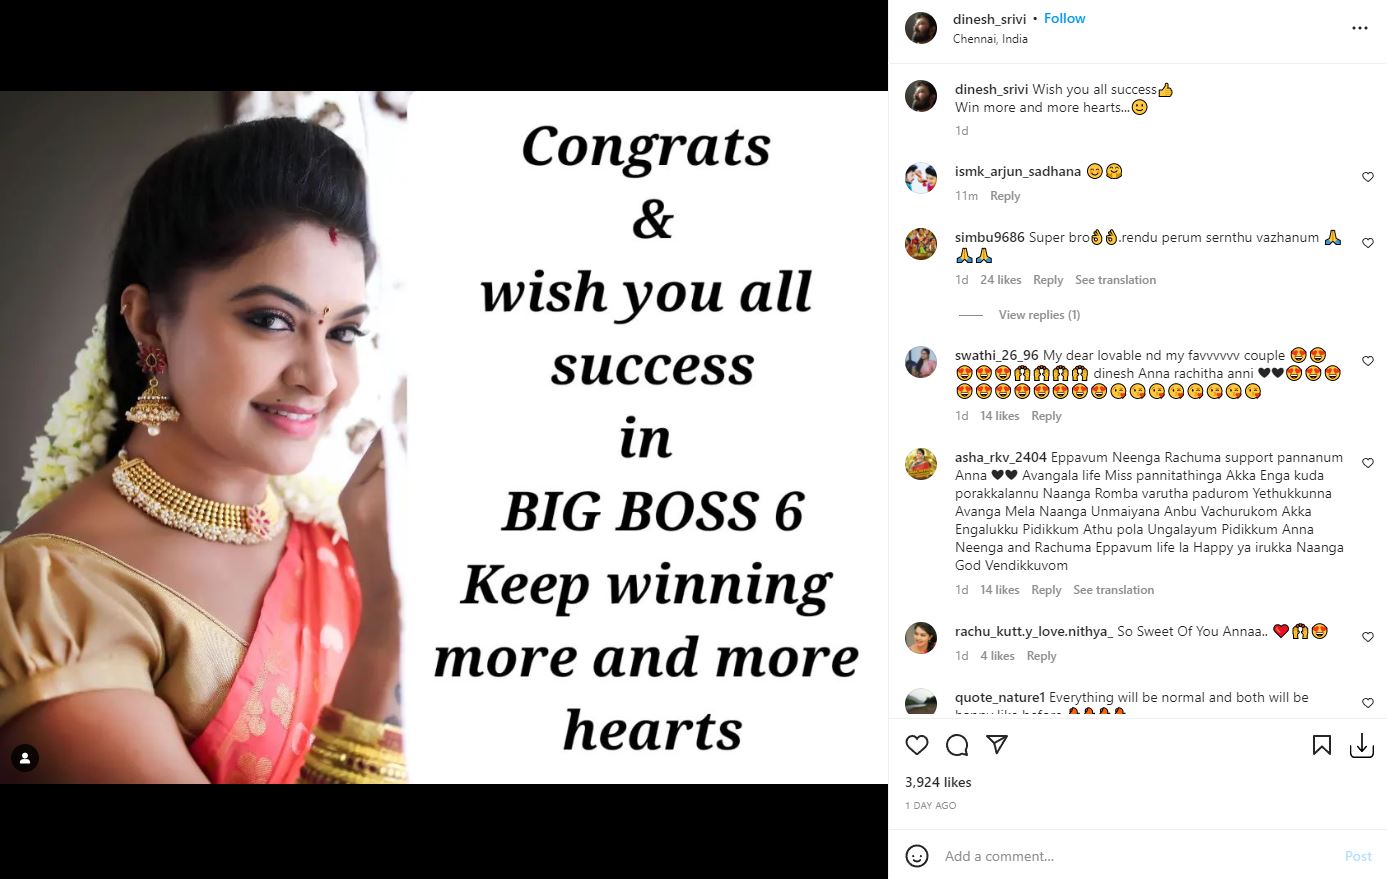 rachitha mahalakshmi dint speak about her husband in biggboss but dinesh wishes her to win the show